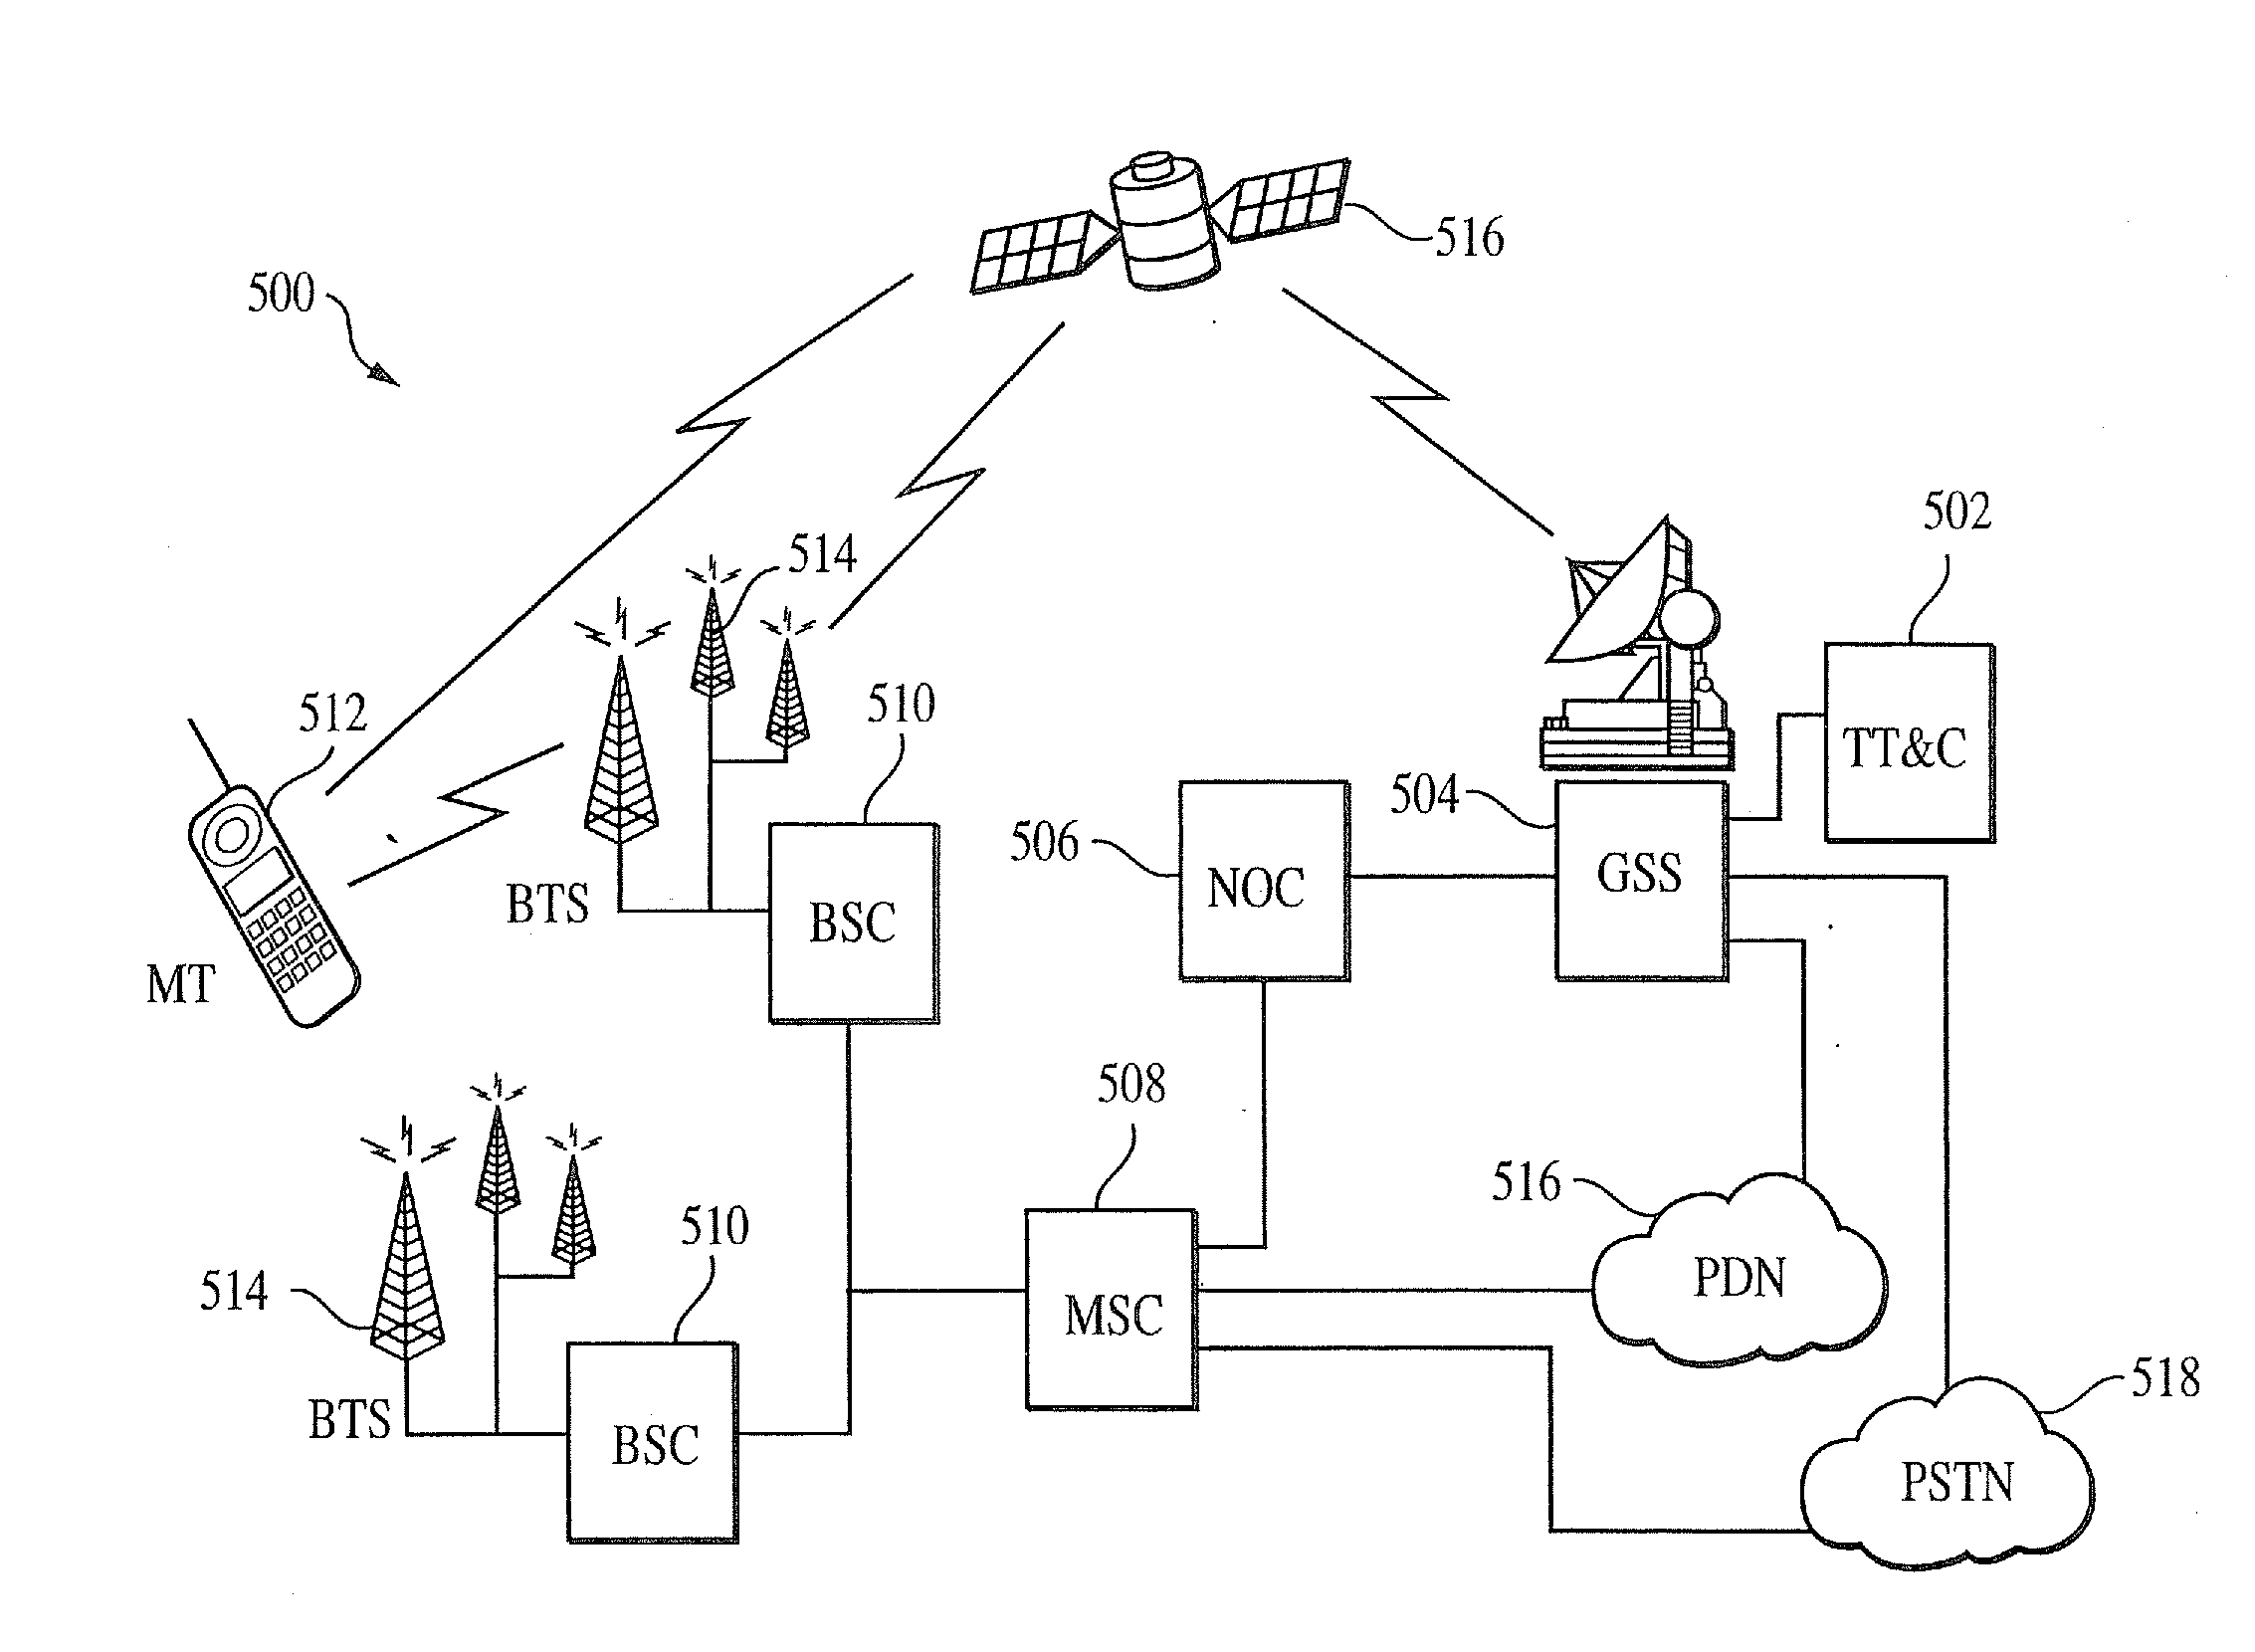 Systems and methods for transmitting electromagnetic energy over a wireless channel having sufficiently weak measured signal strength